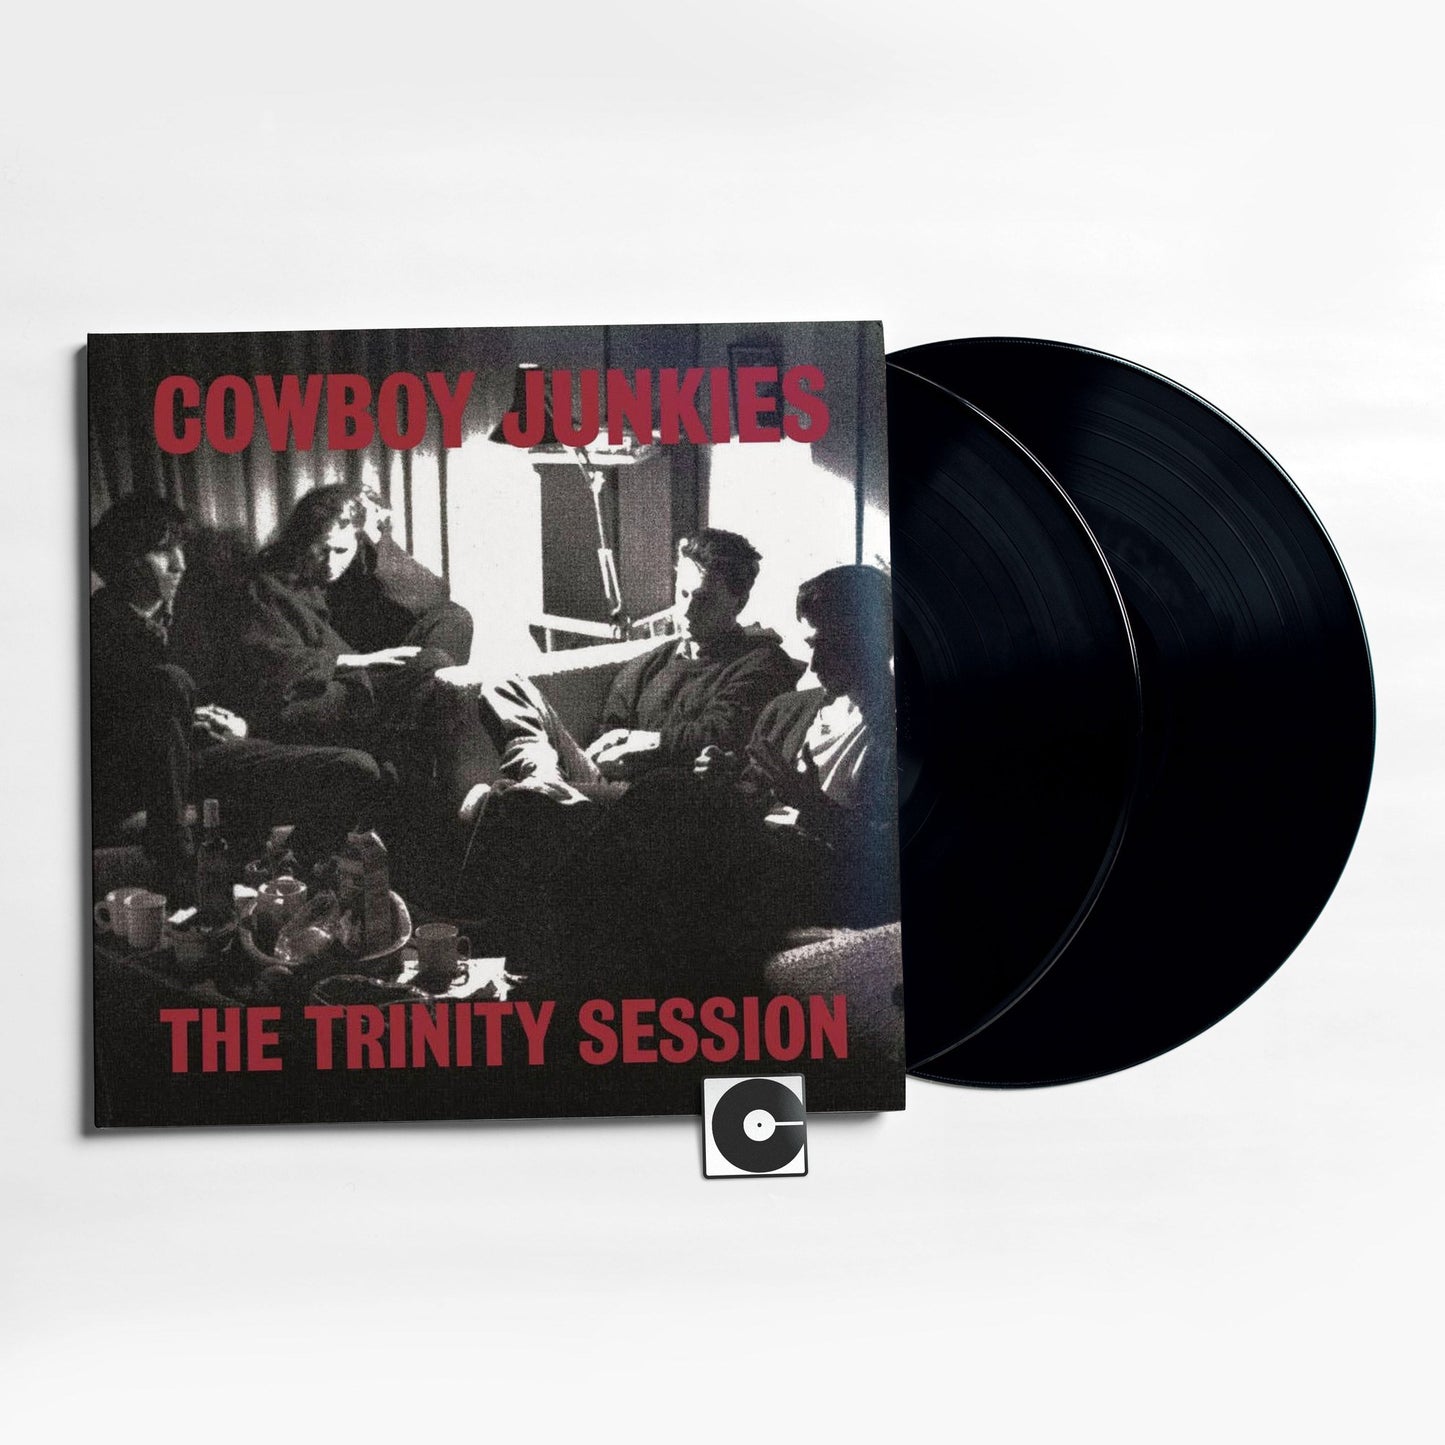 Cowboy Junkies - "The Trinity Sessions" Analogue Productions